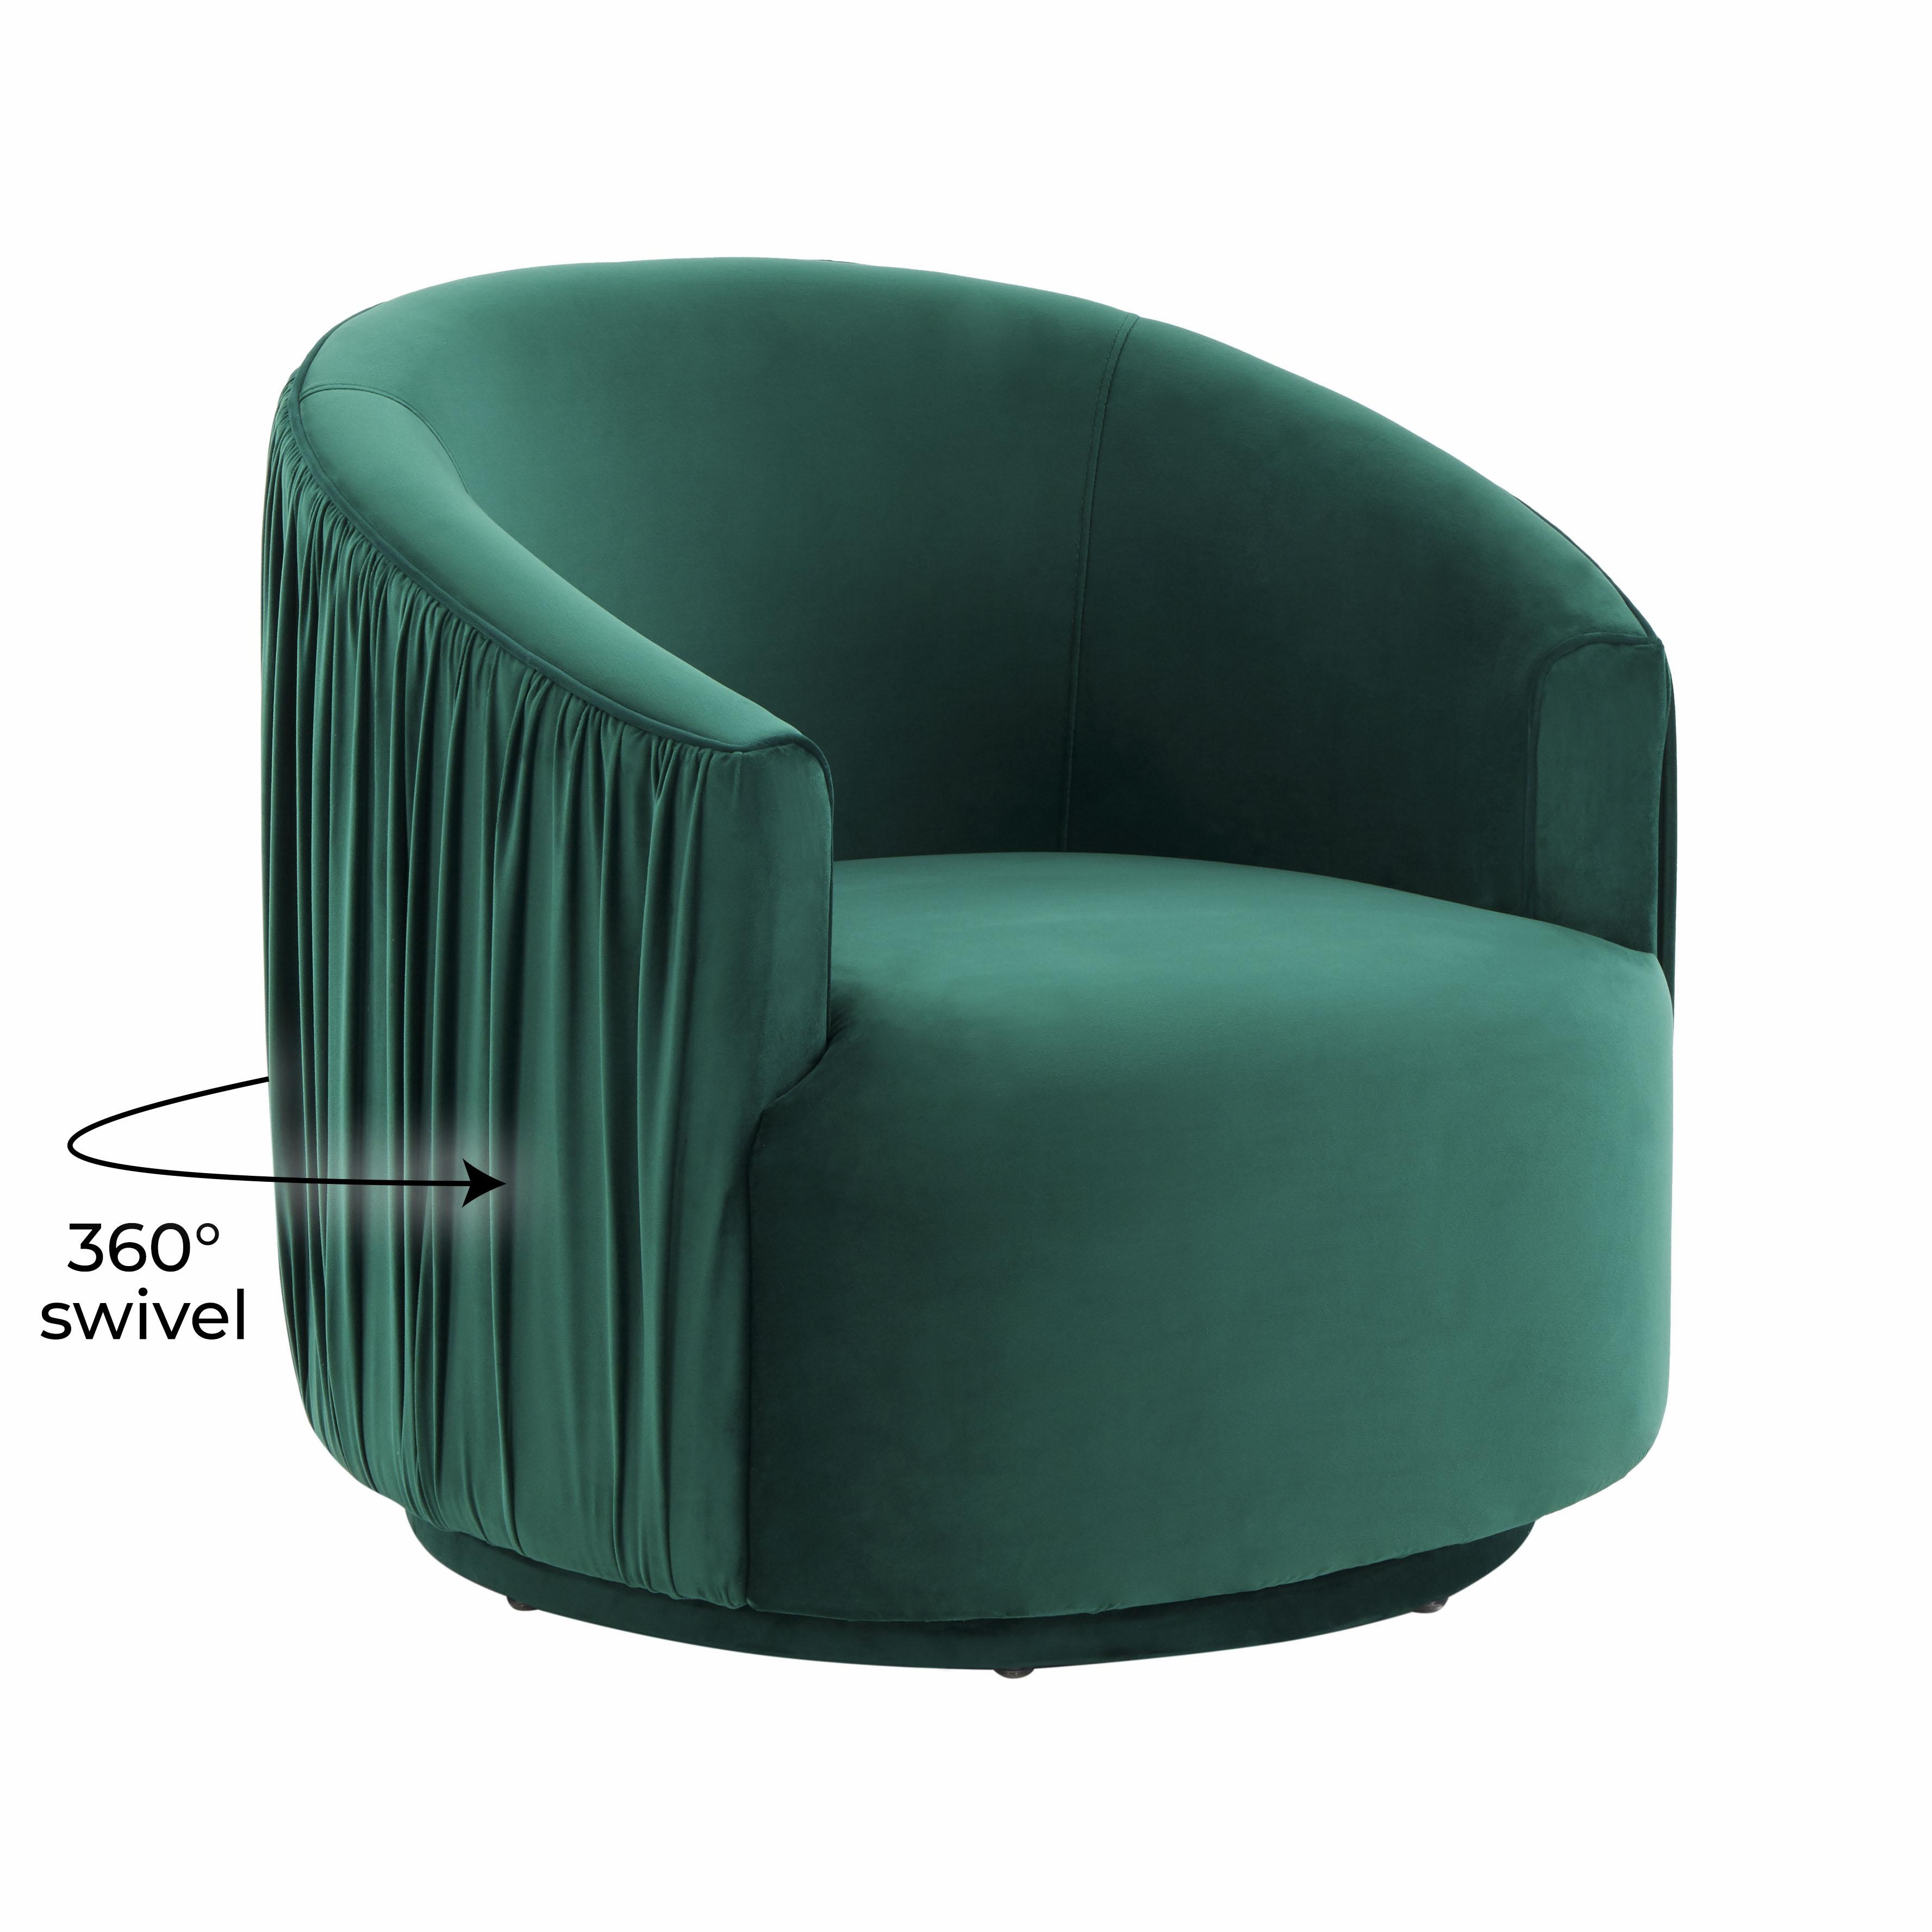 London Forest Green Pleated Swivel Chair - Image 4